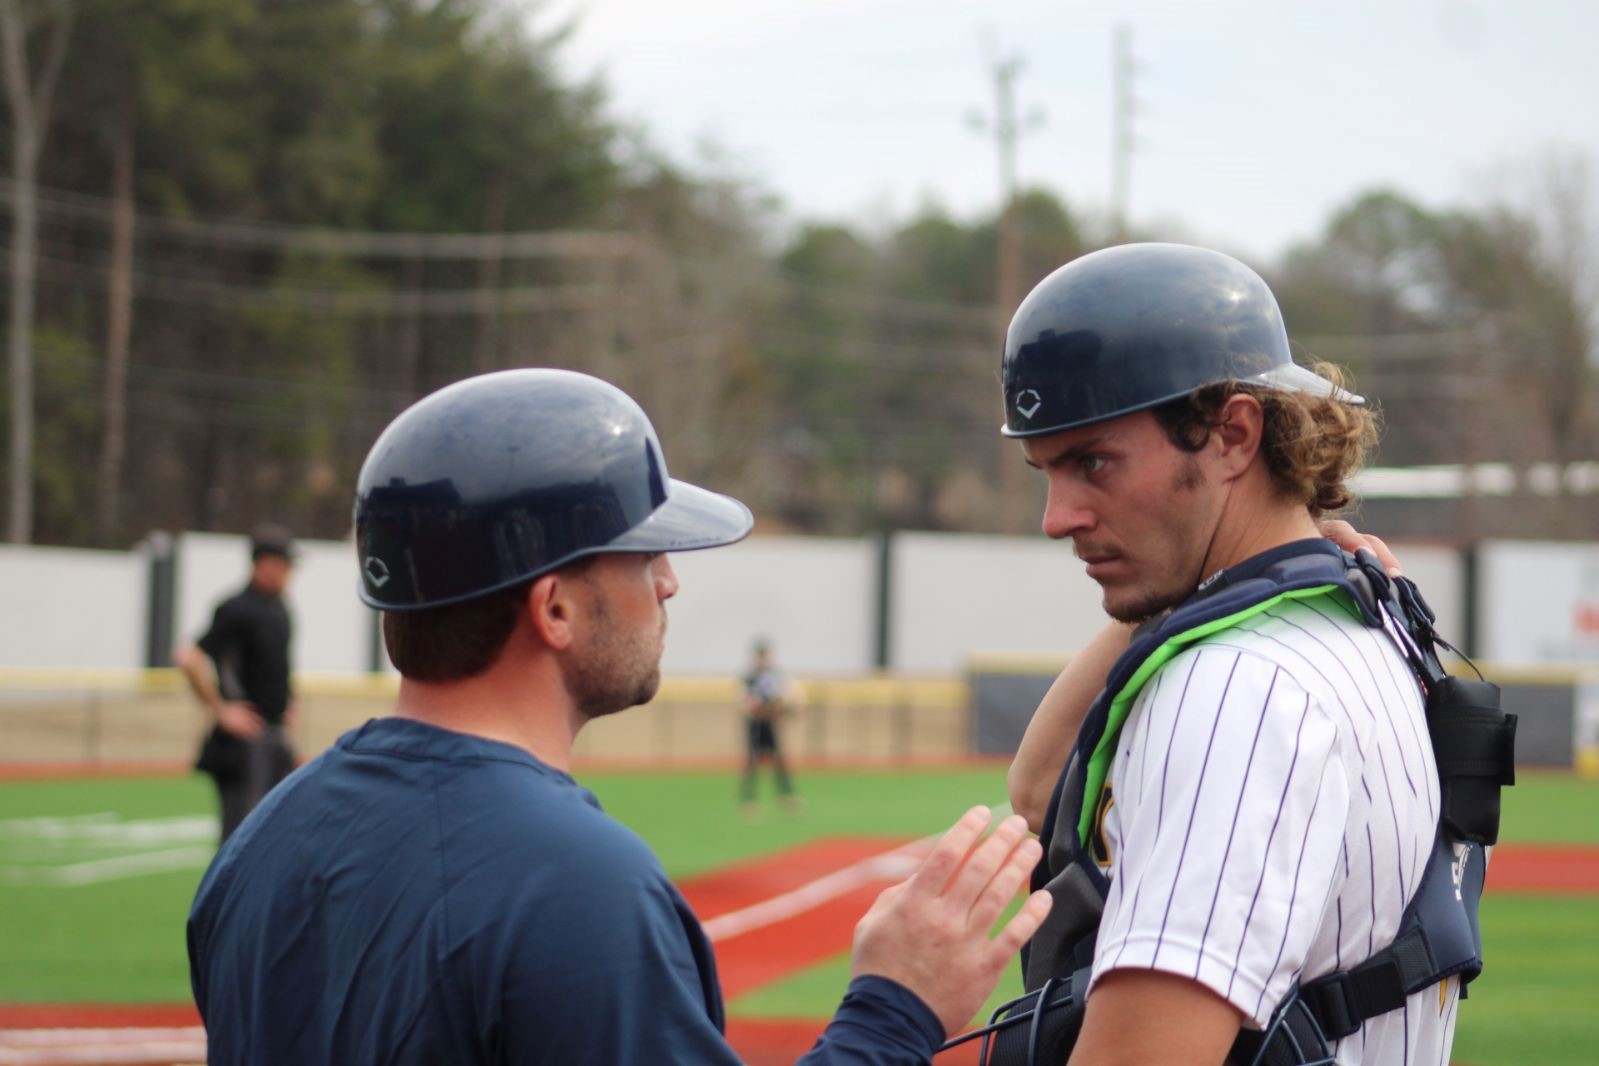 Gaston College catcher Seth Christmas, shown here talking to Rhinos assistant coach Jacob Rand, is hitting .388 with 12 home runs, 70 RBIs and 18 stolen bases this season entering the Region 10 tournament.